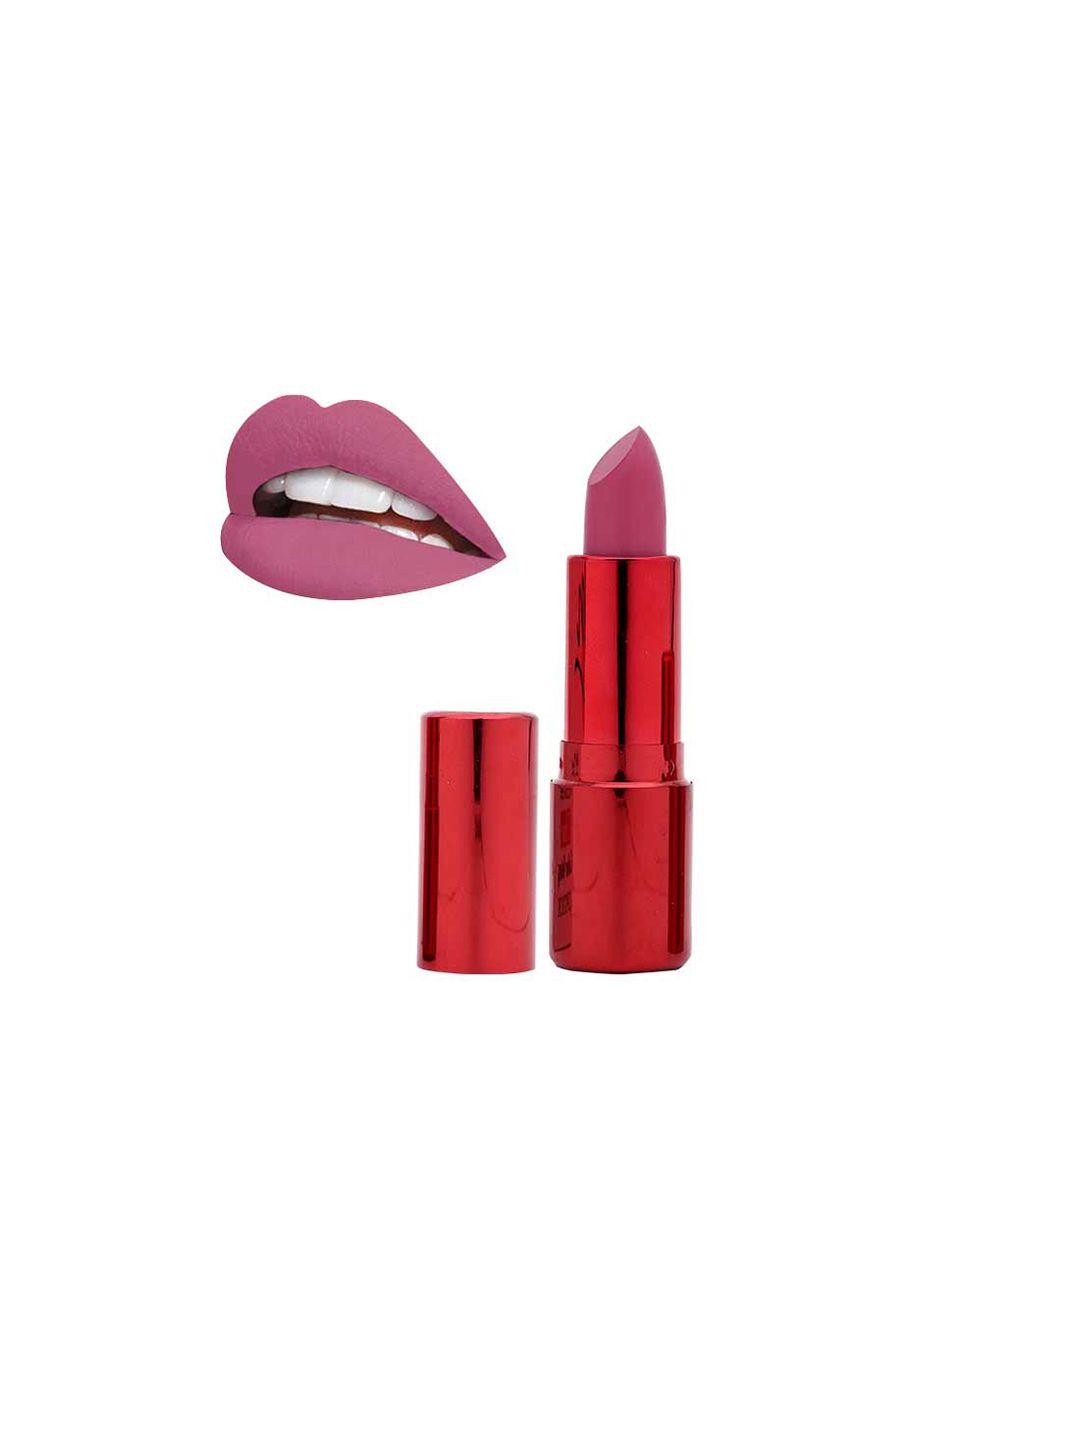 beautyrelay london 12 hour color stay lipstick with vitamin c 3.5g - cherry blossom